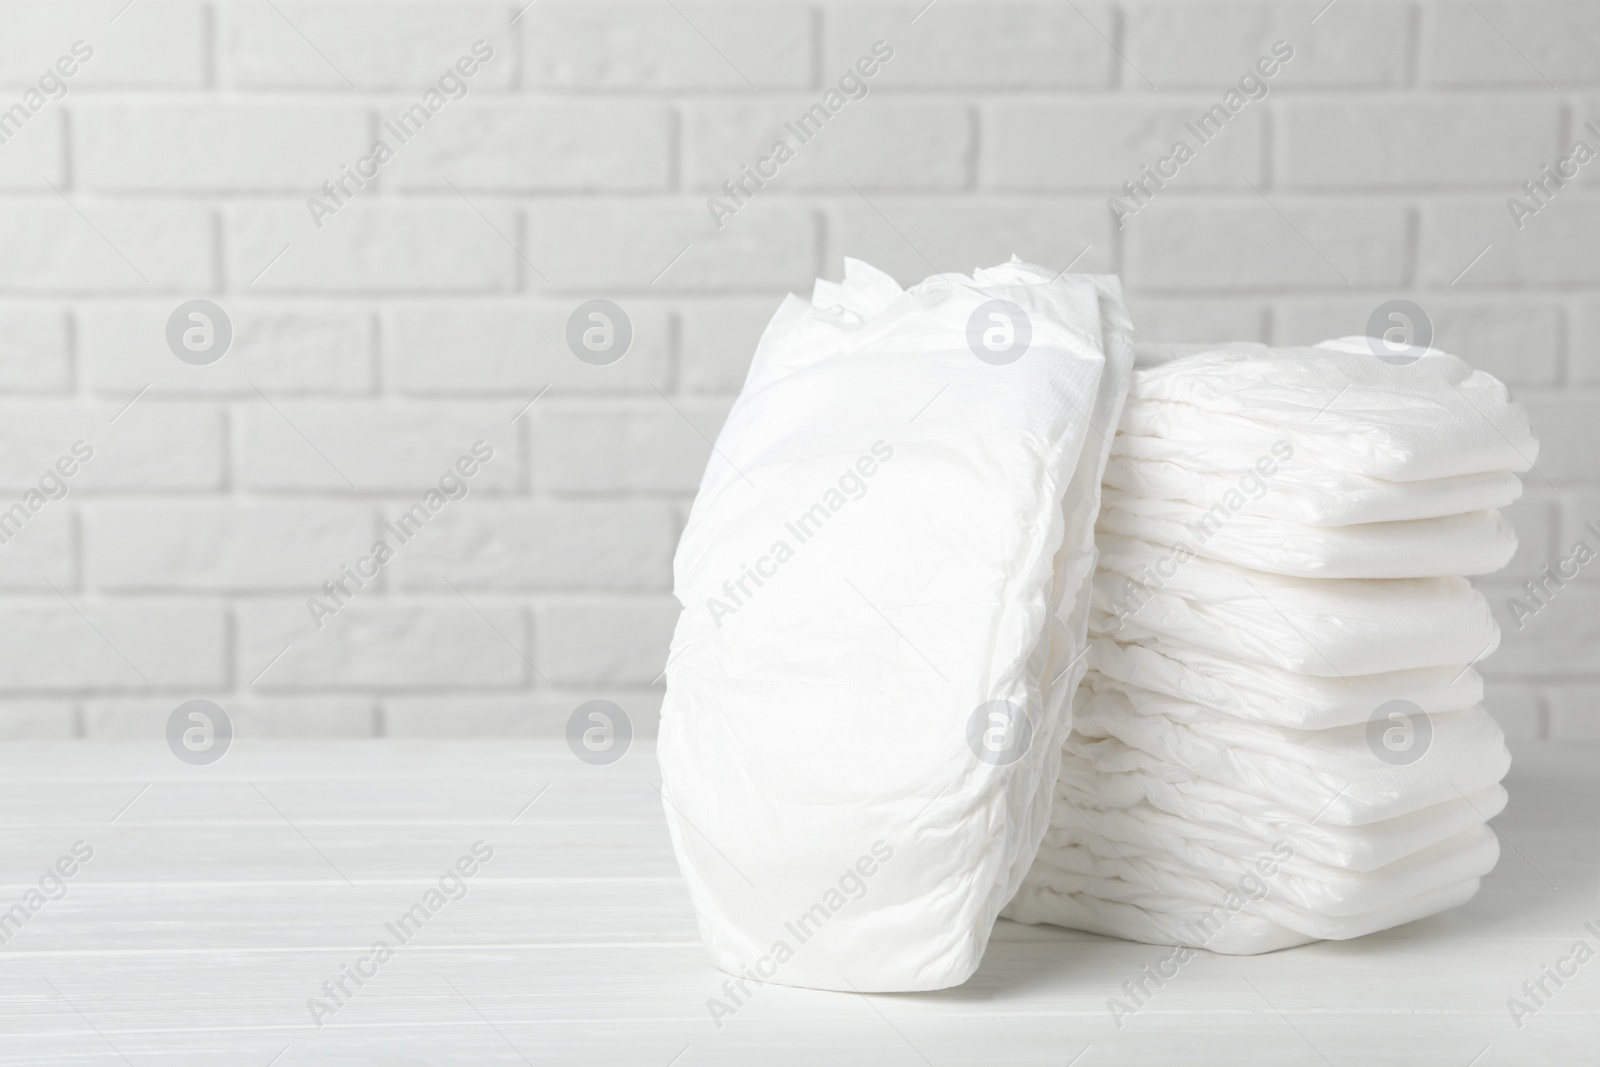 Photo of Baby diapers on wooden table against white brick wall. Space for text